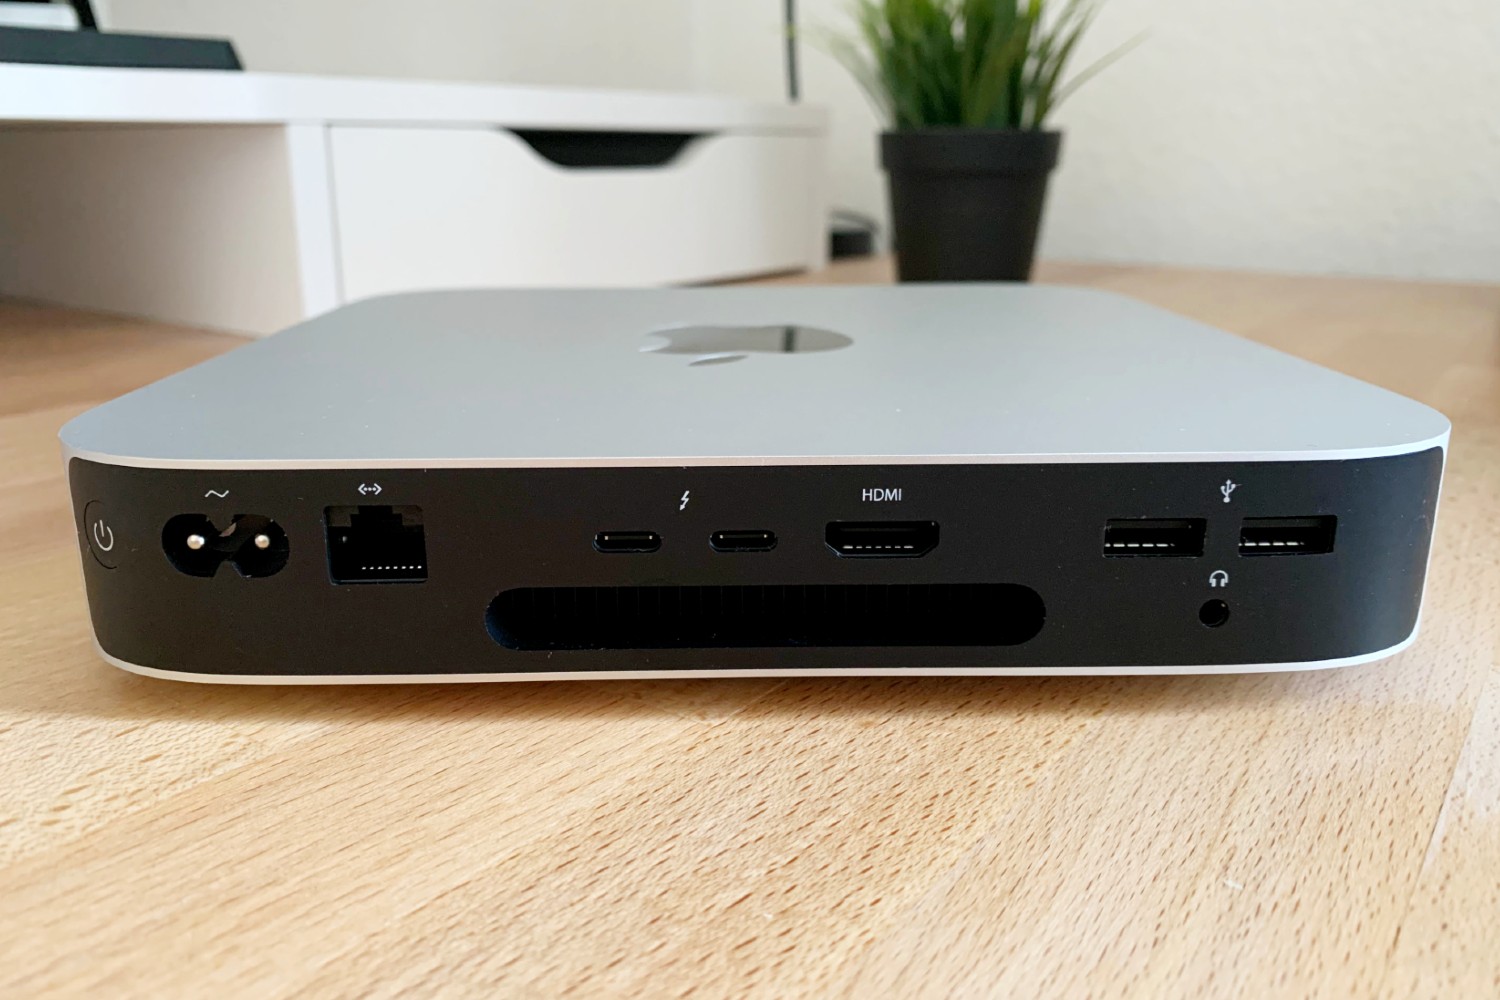 A new Mac mini could come as soon as next week, here's what we